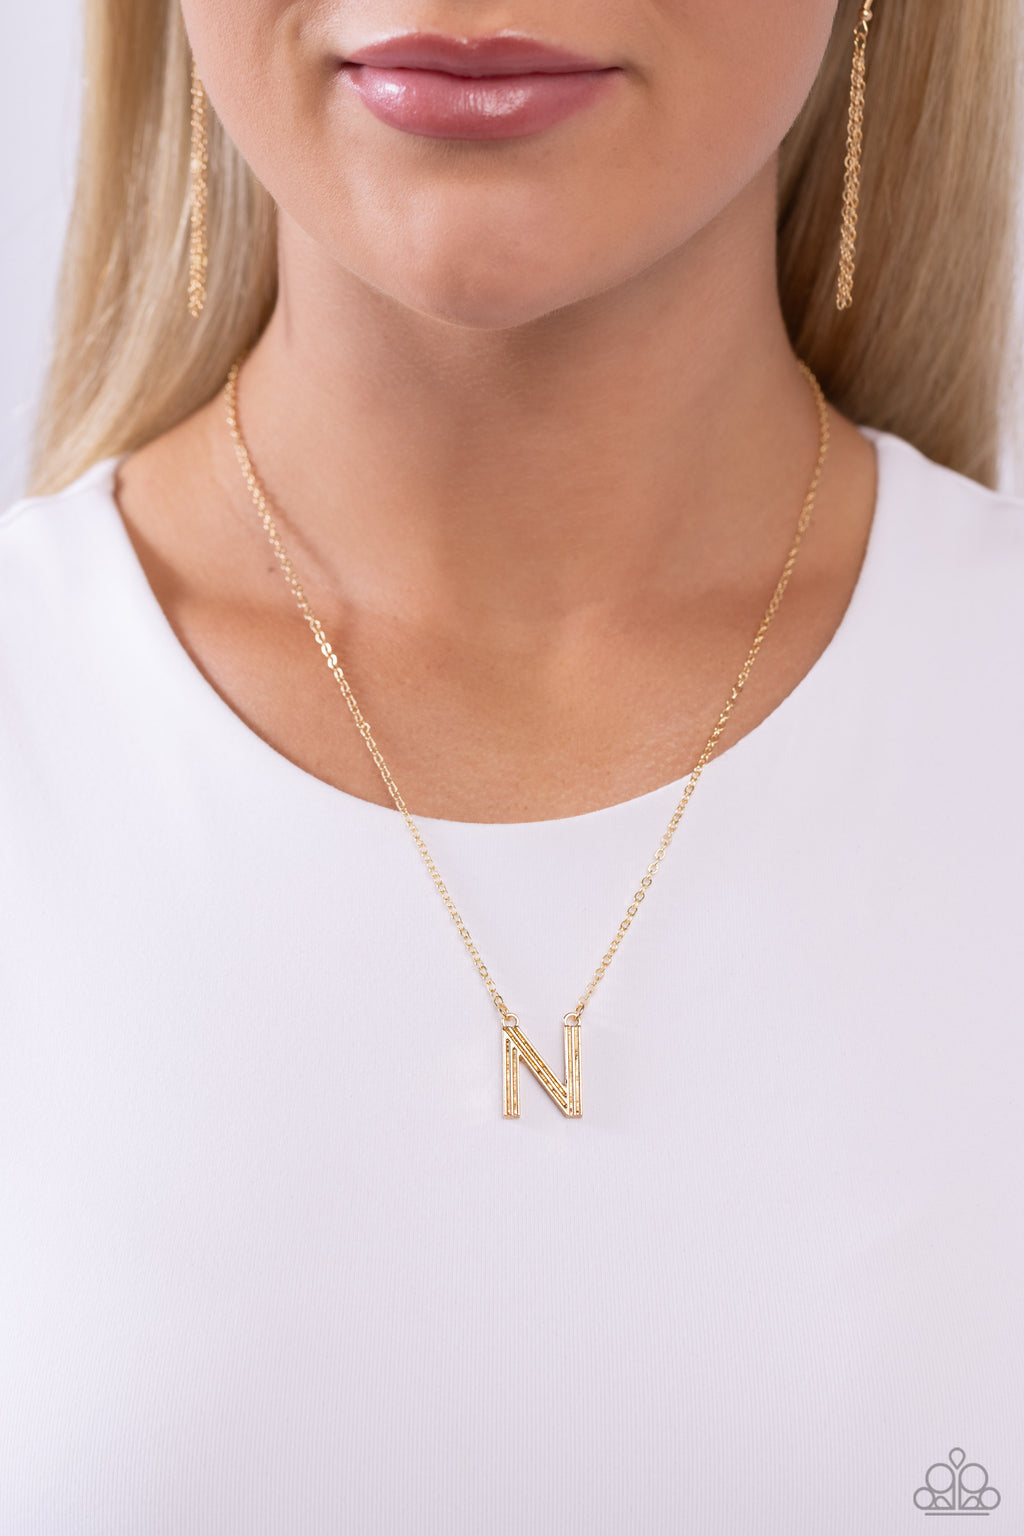 Paparazzi - Leave Your Initials - Gold - N Necklace